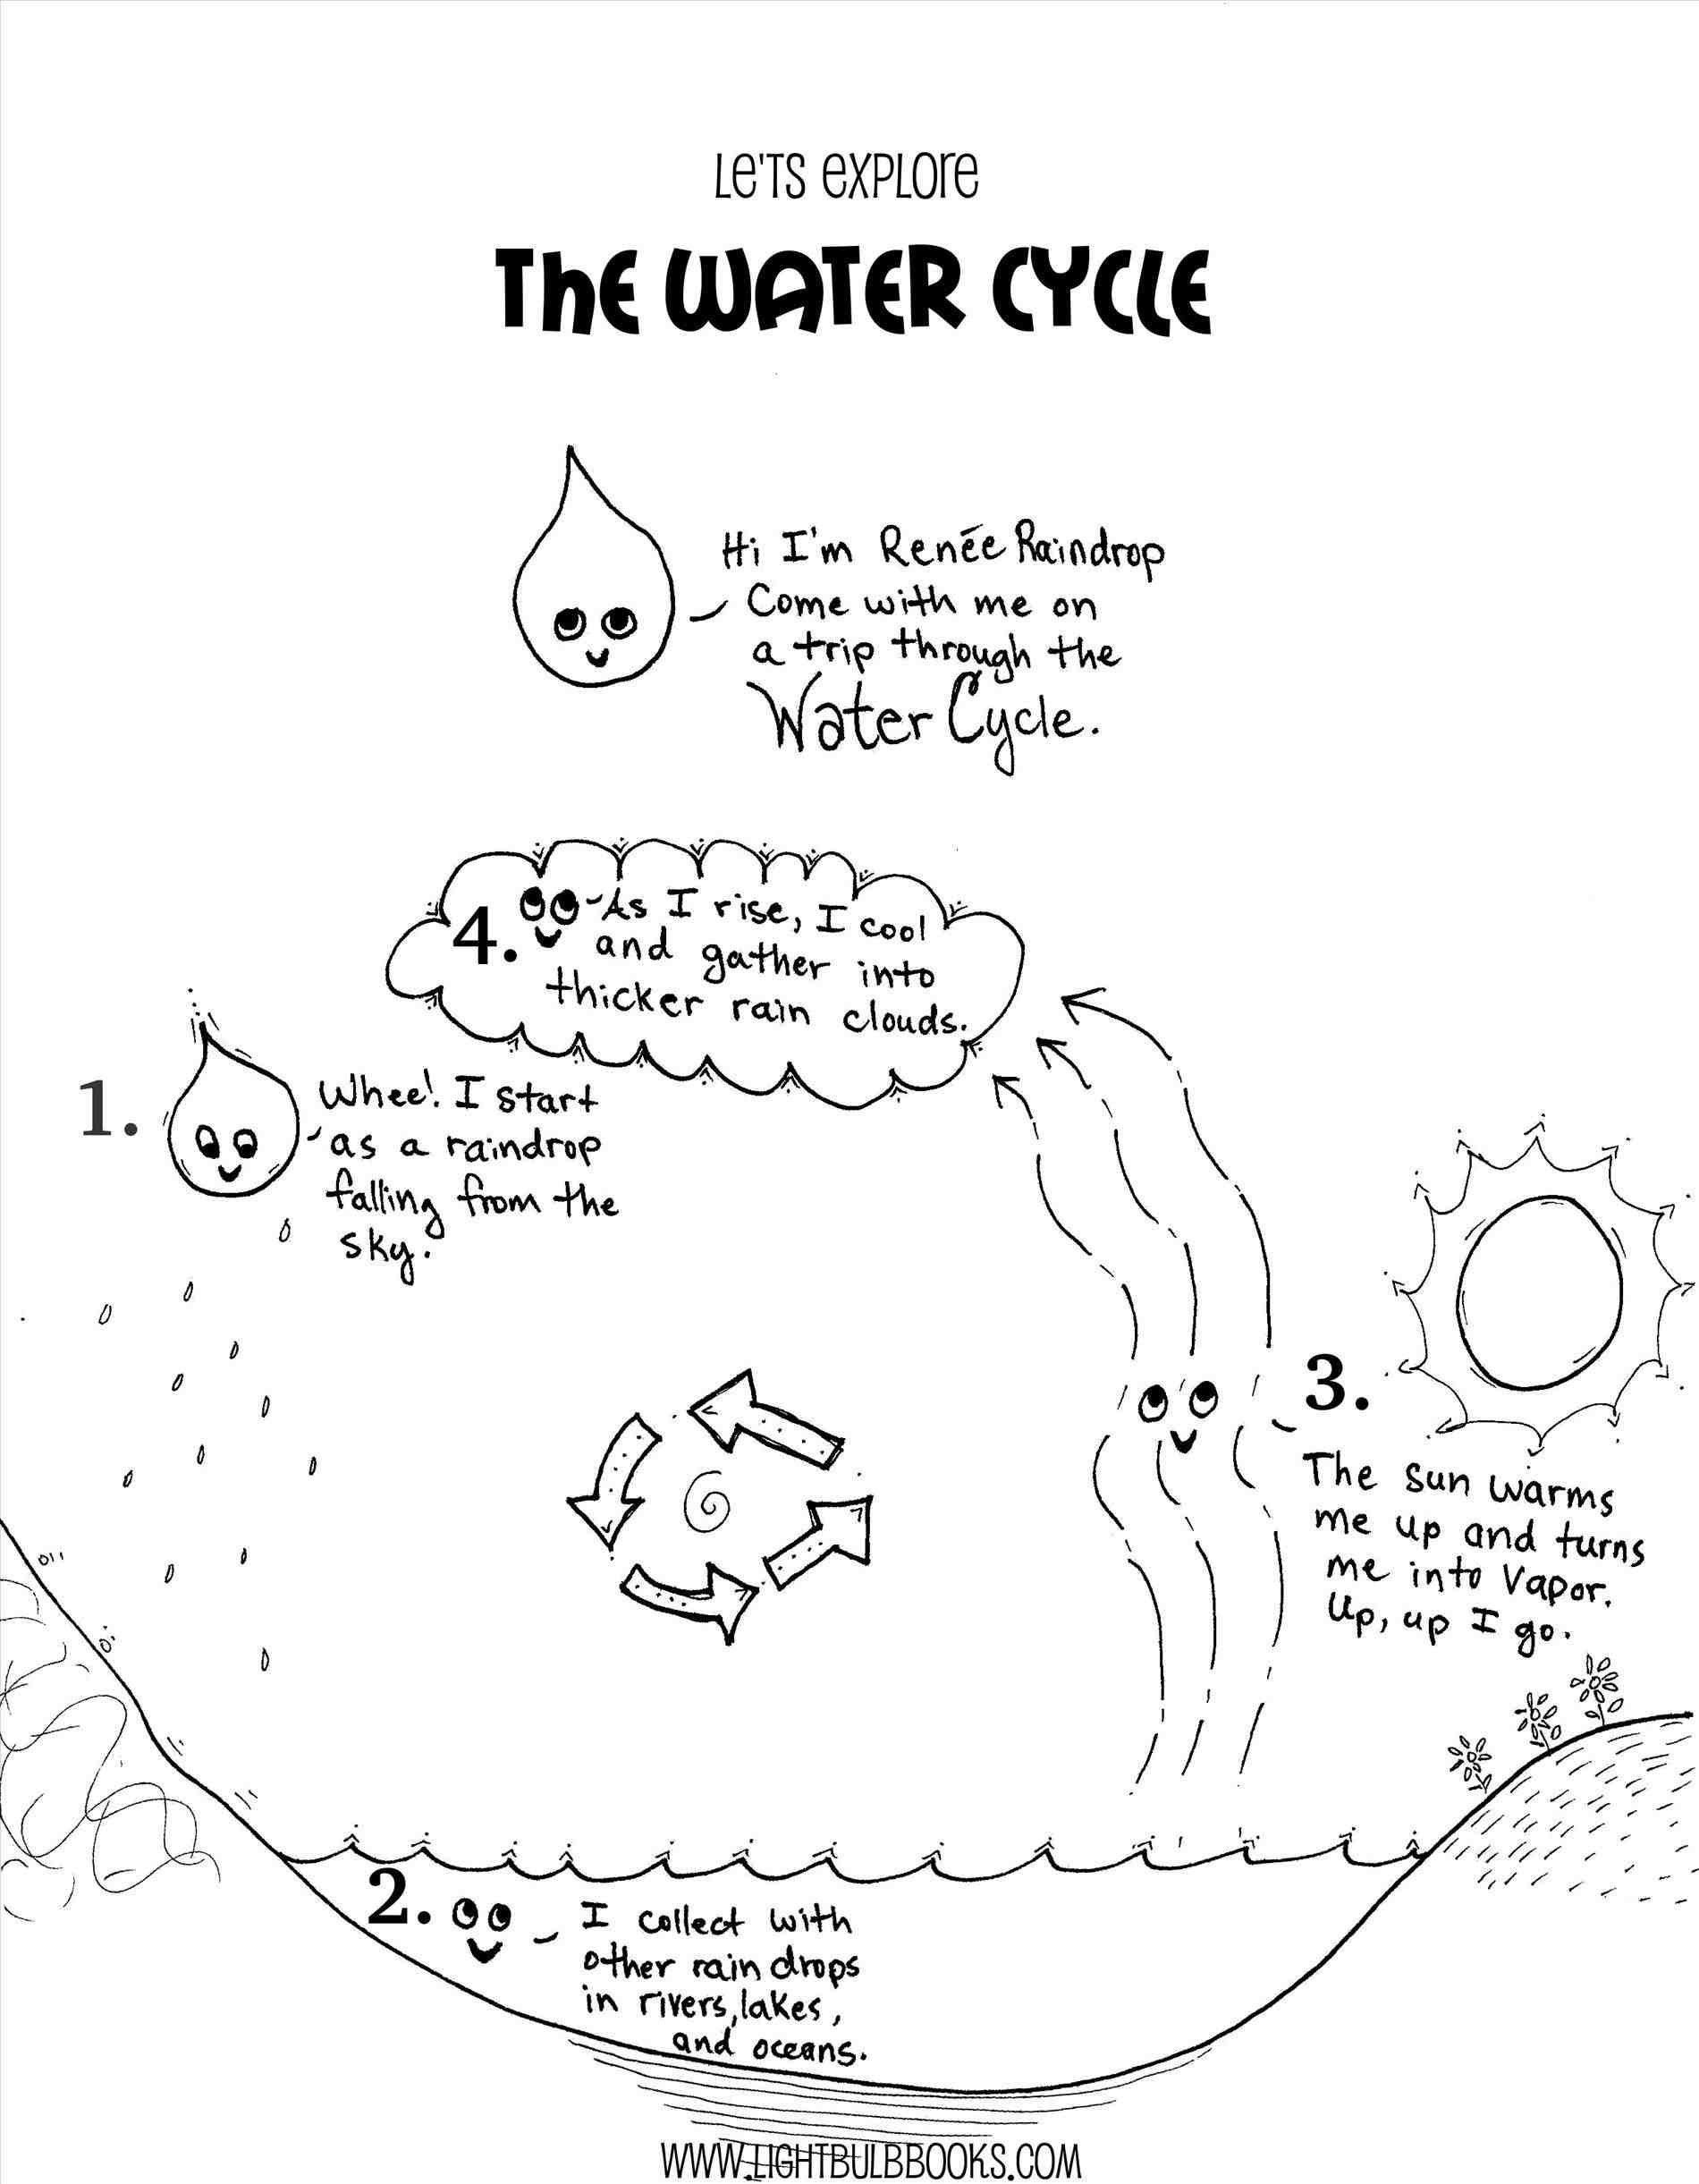 The Water Cycle Worksheet Answers the Water Cycle Worksheet Answer Key and Water Cycle